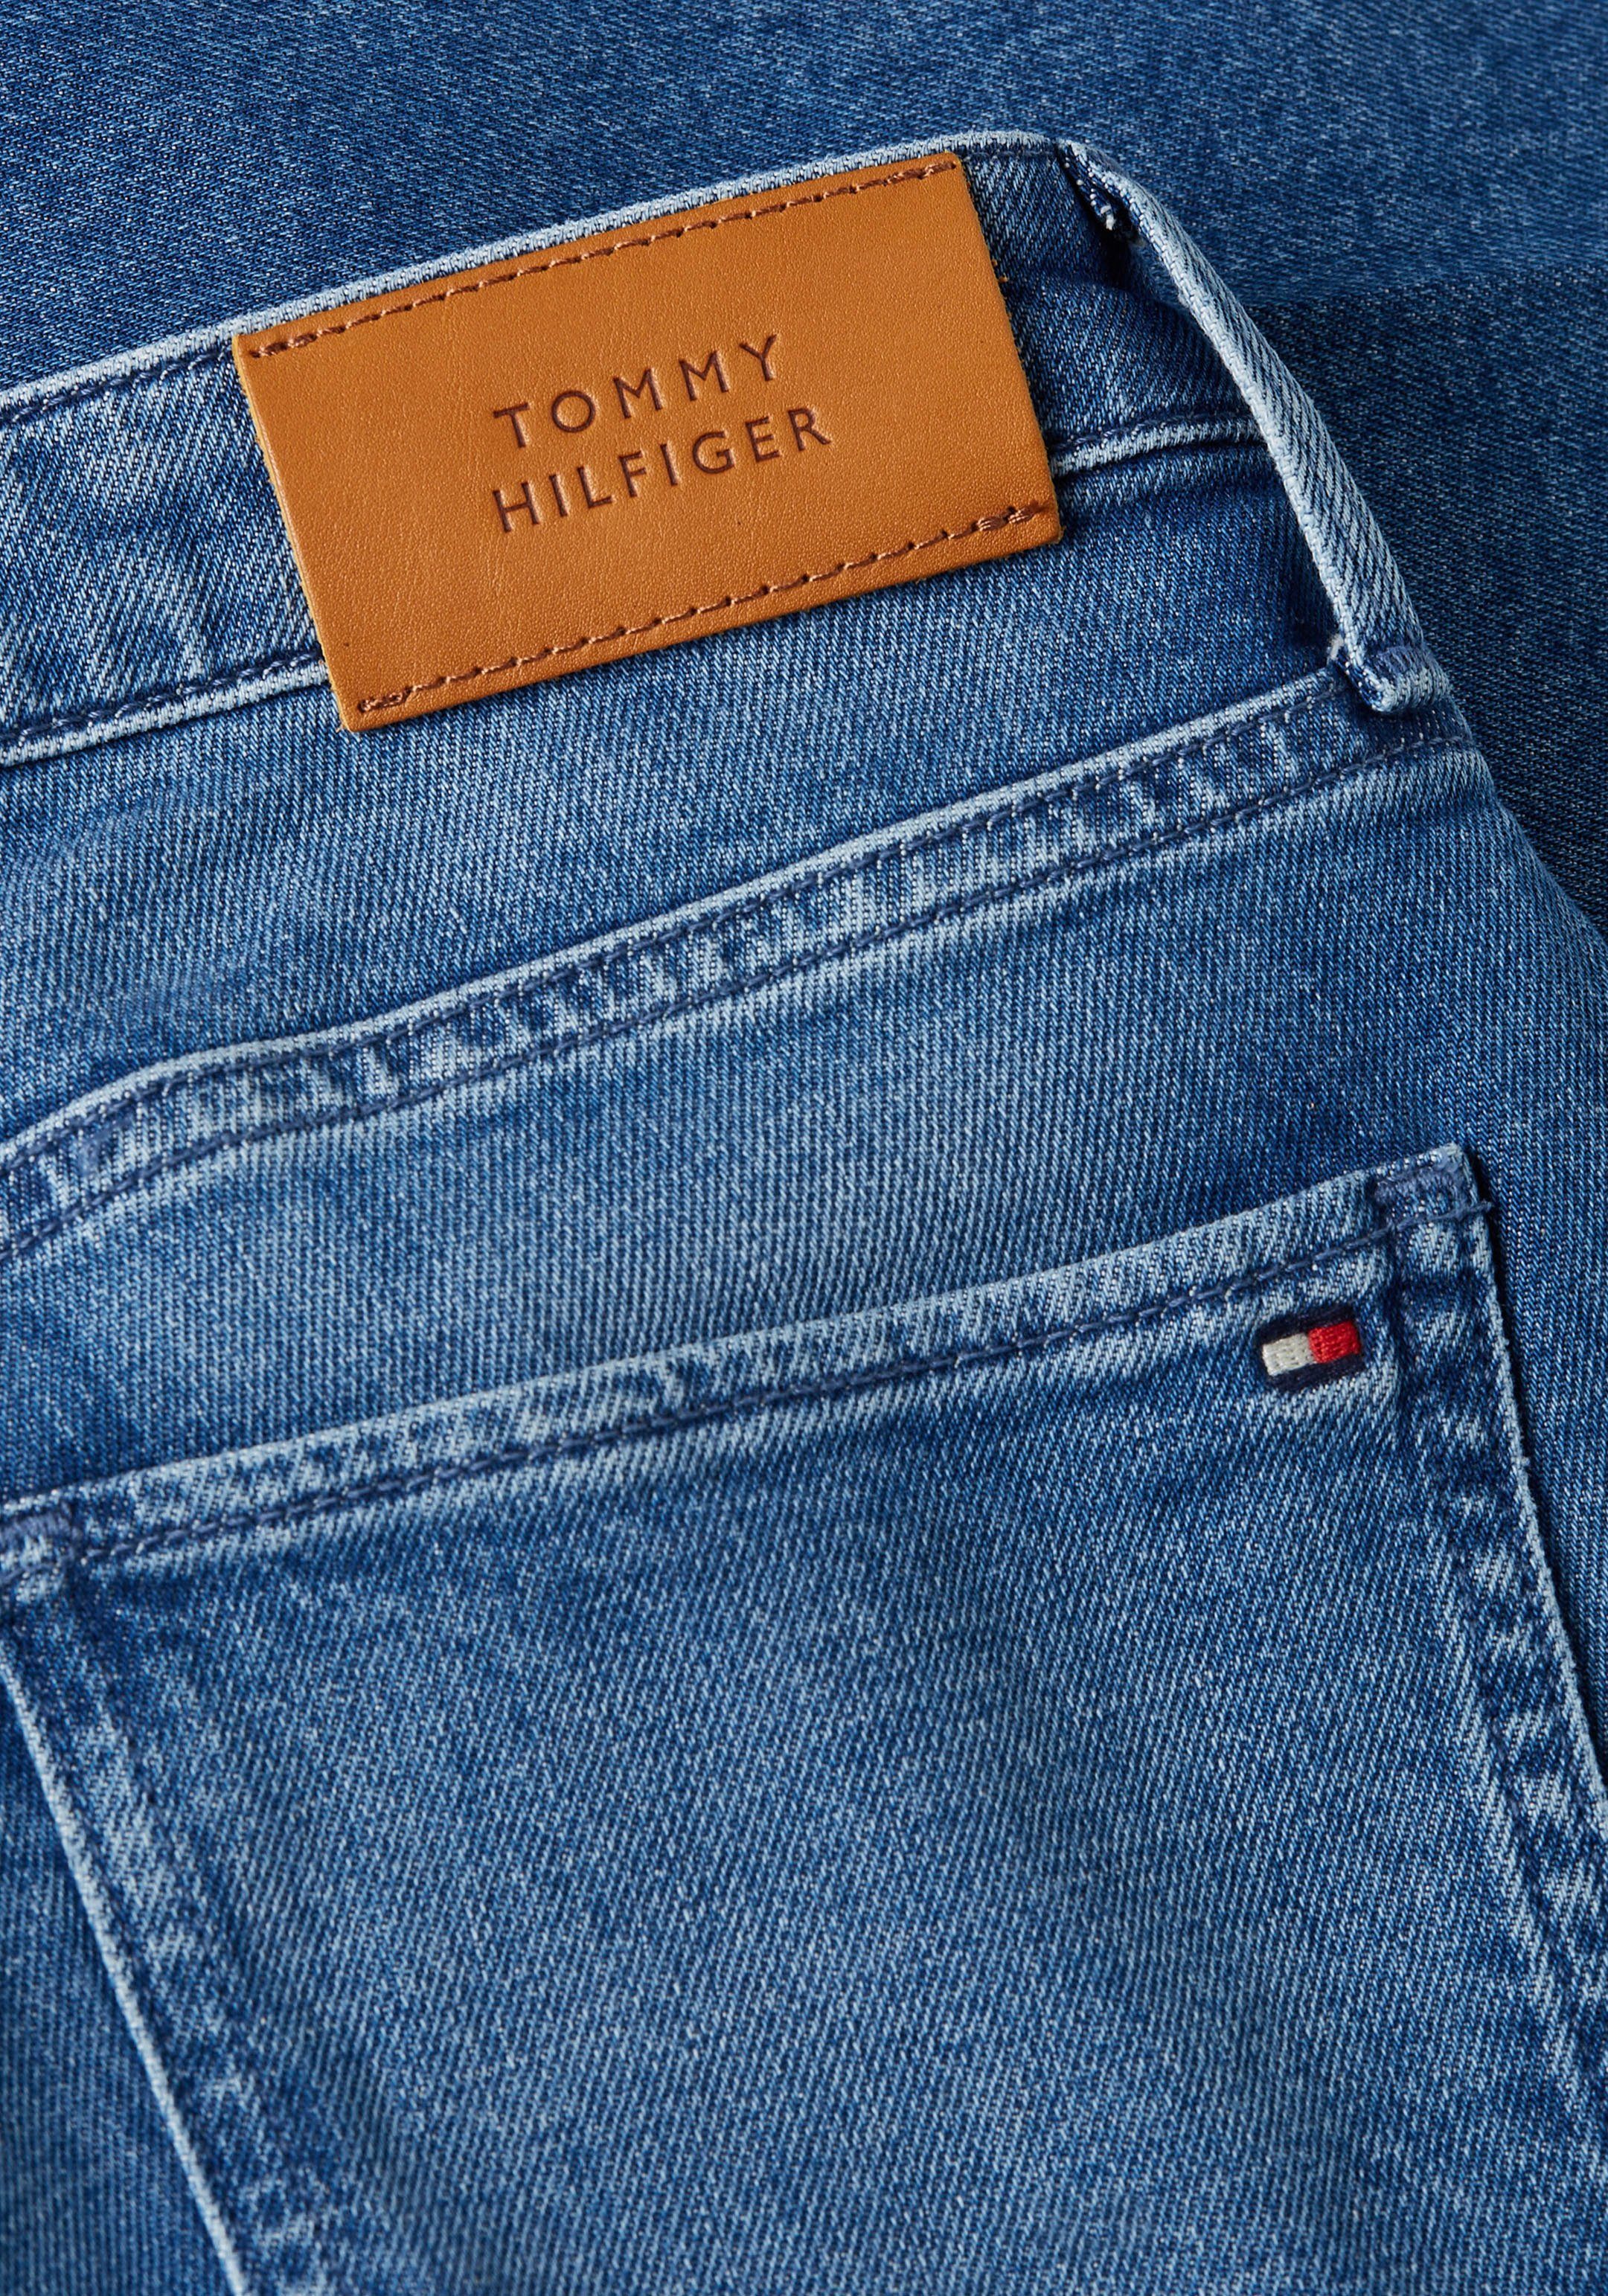 Tommy Hilfiger Bootcut-Jeans BOOTCUT Logo-Badge mid PATY RW Tommy mit blue Hilfiger